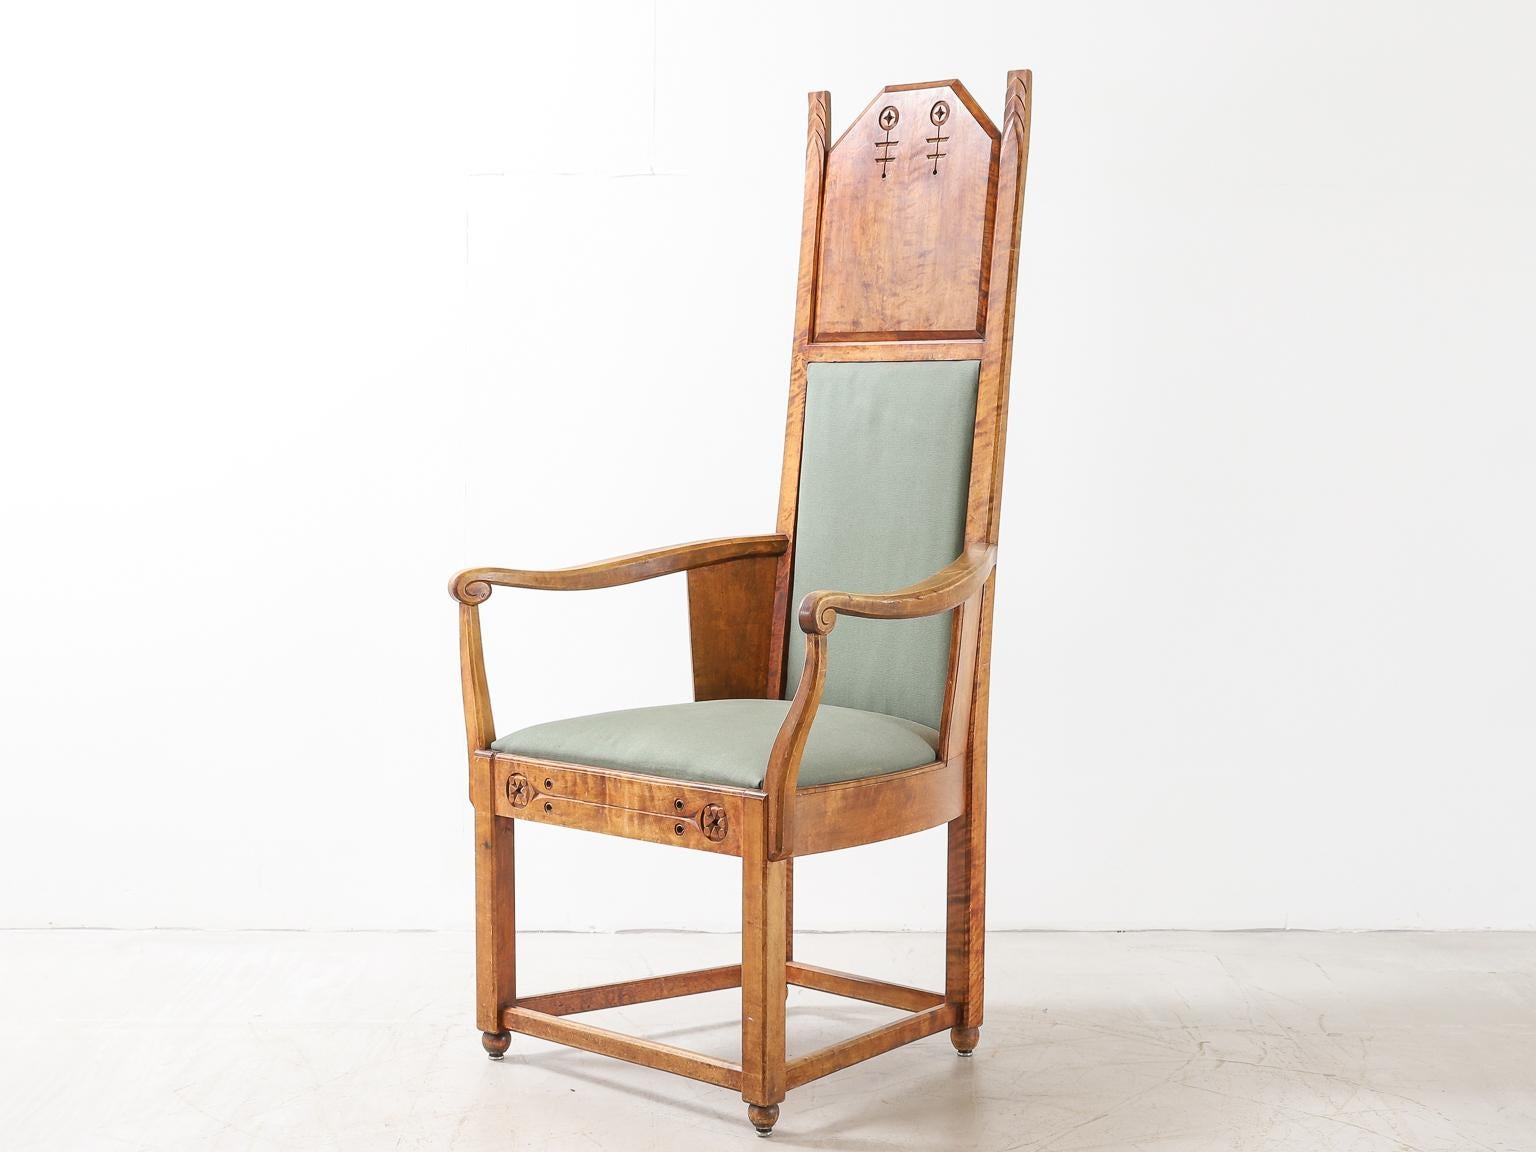 A architecturally shaped Arts & Crafts armchair designed by Lars Israël Wahlman, one of Sweden’s leading architects and designers of the early 20th Century. He worked in what was termed the ‘National Romantic Style’ which drew inspiration from the